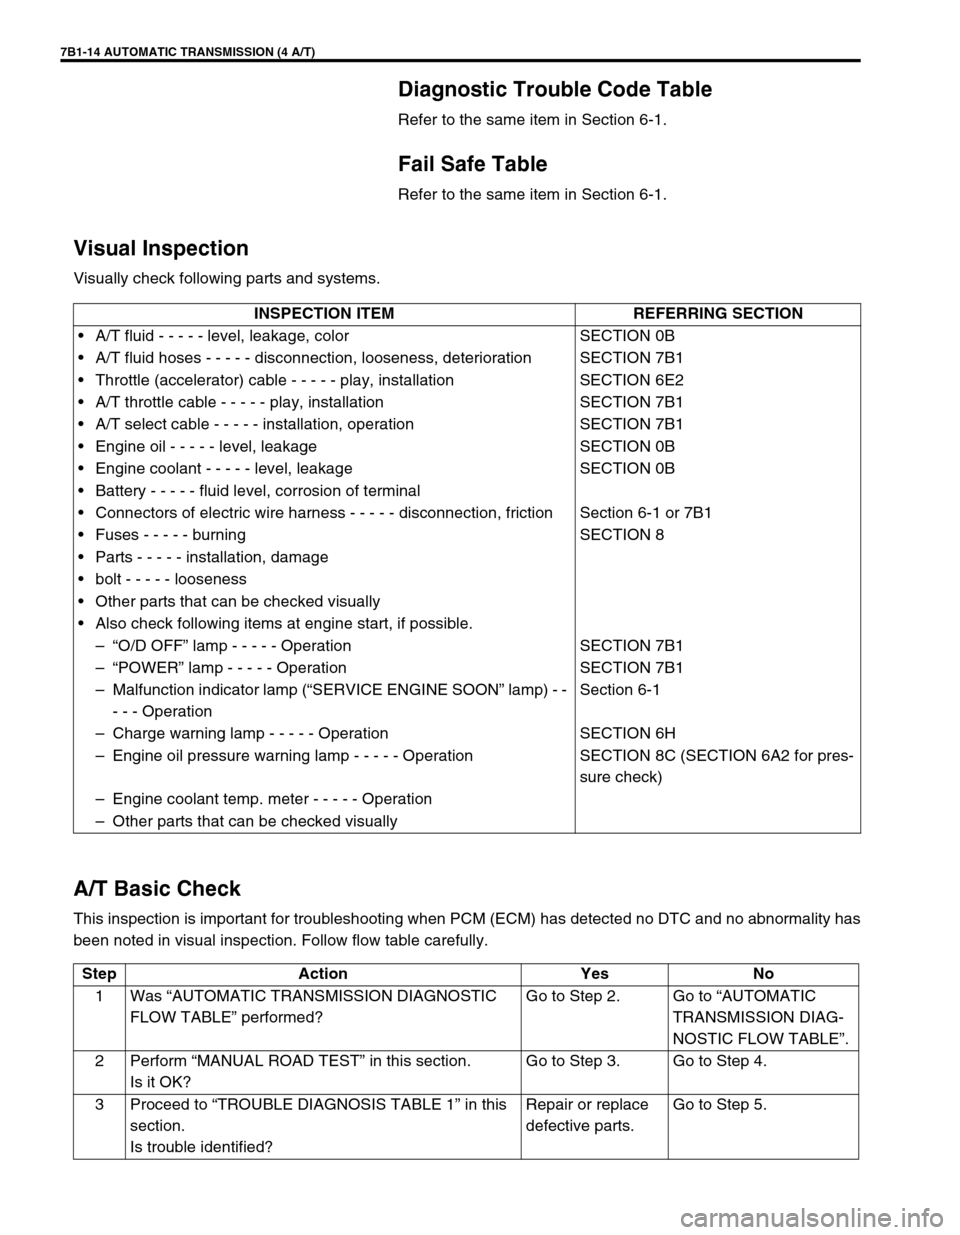 SUZUKI GRAND VITARA 1999 2.G Owners Guide 7B1-14 AUTOMATIC TRANSMISSION (4 A/T)
Diagnostic Trouble Code Table
Refer to the same item in Section 6-1.
Fail Safe Table
Refer to the same item in Section 6-1.
Visual Inspection
Visually check follo